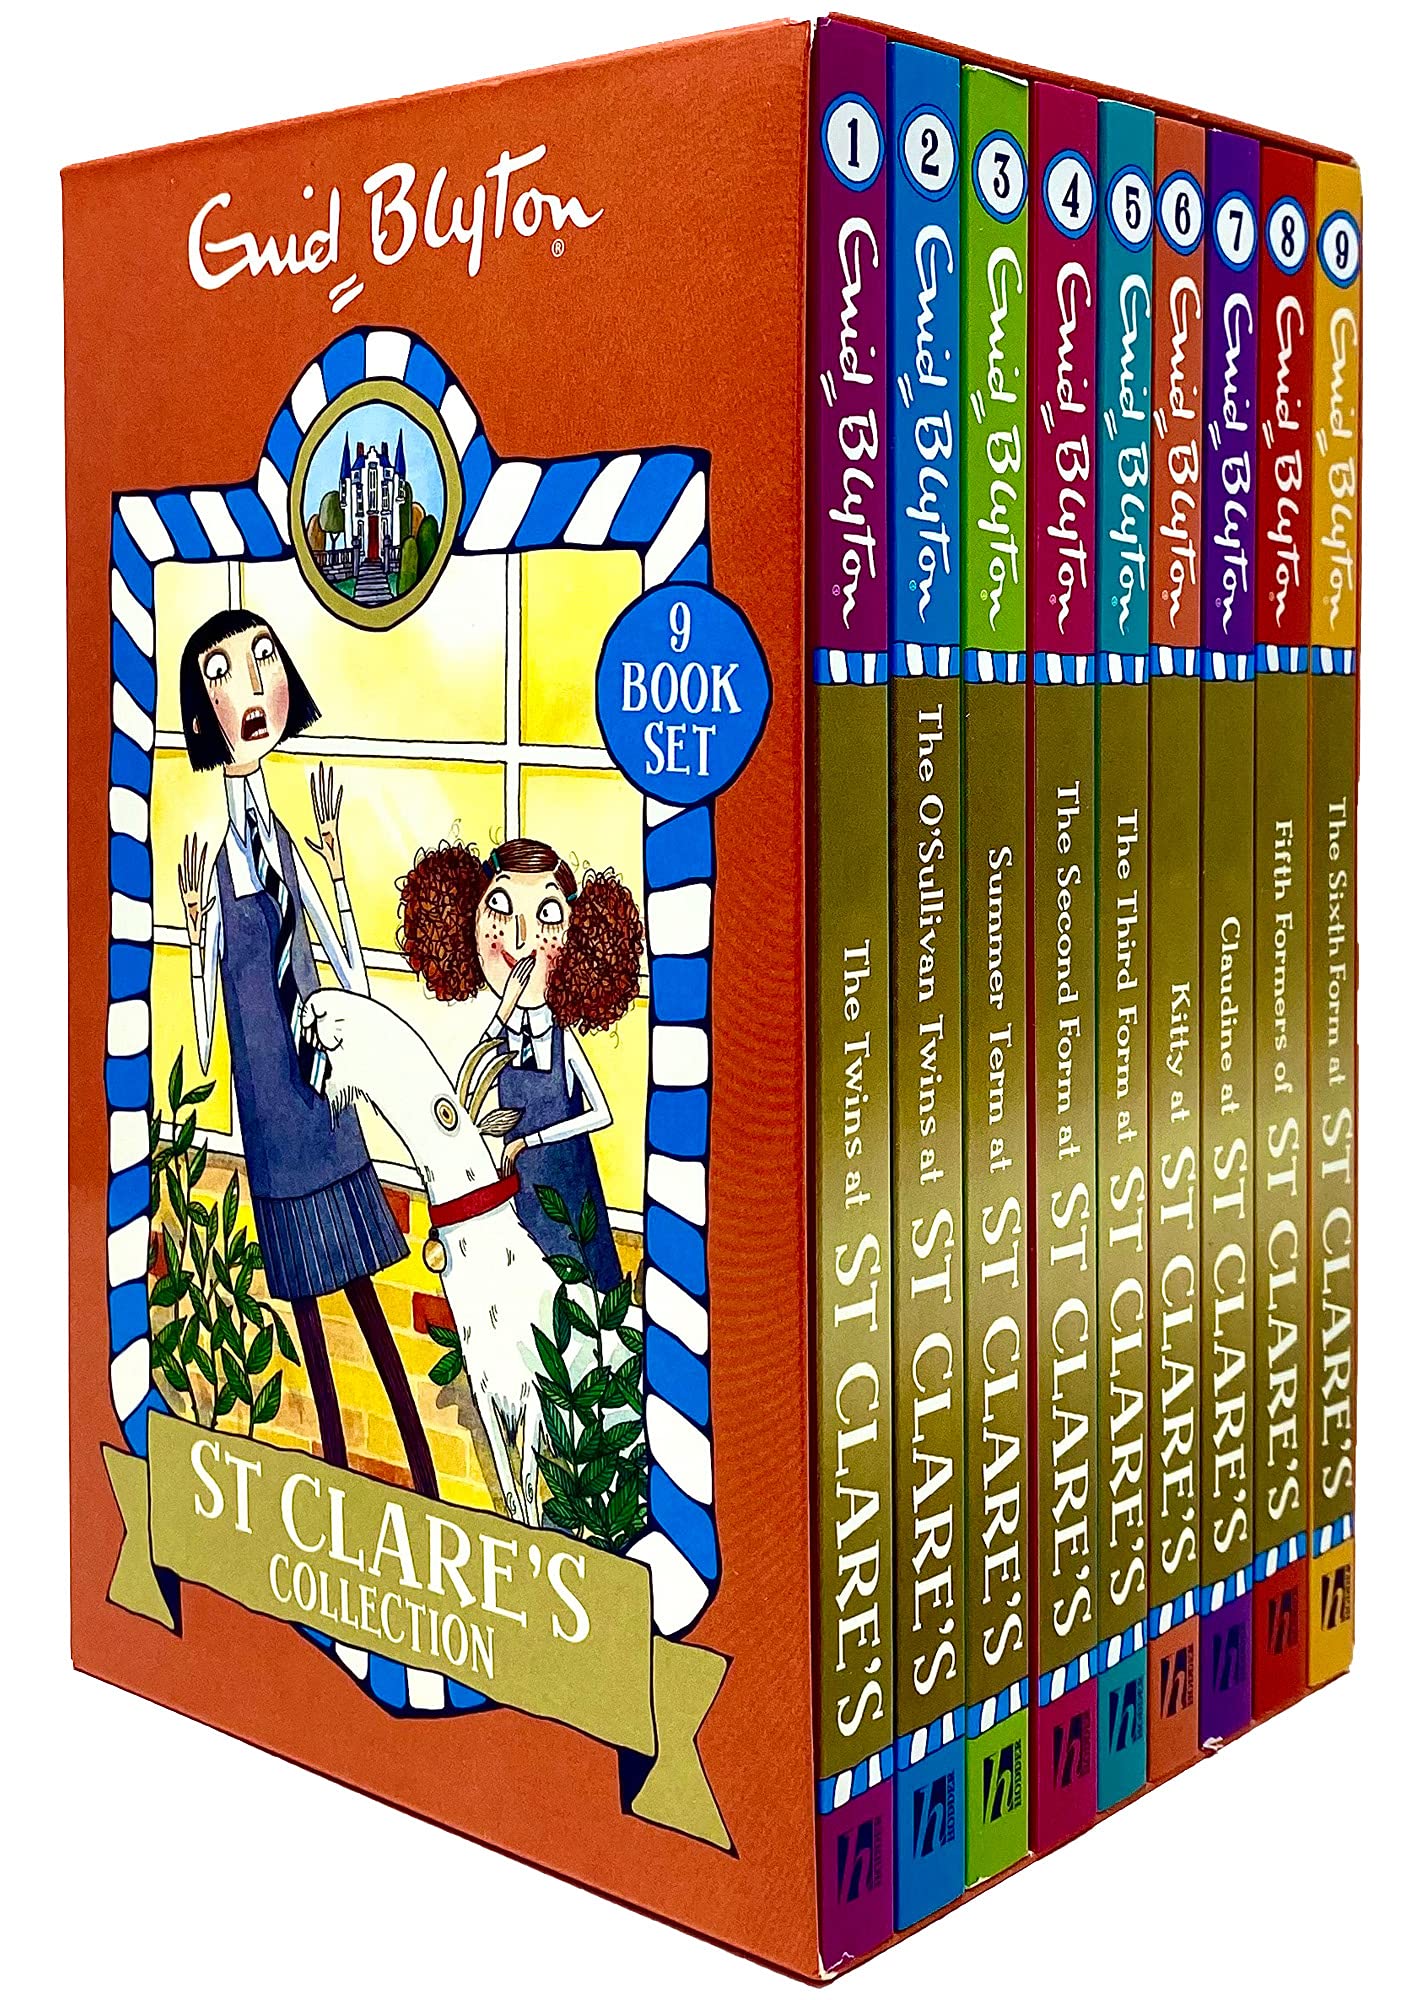 St Clare's Collection 9 Books Box Set by Enid Blyton Sixth Form, Claudine, Summer Term - Lets Buy Books